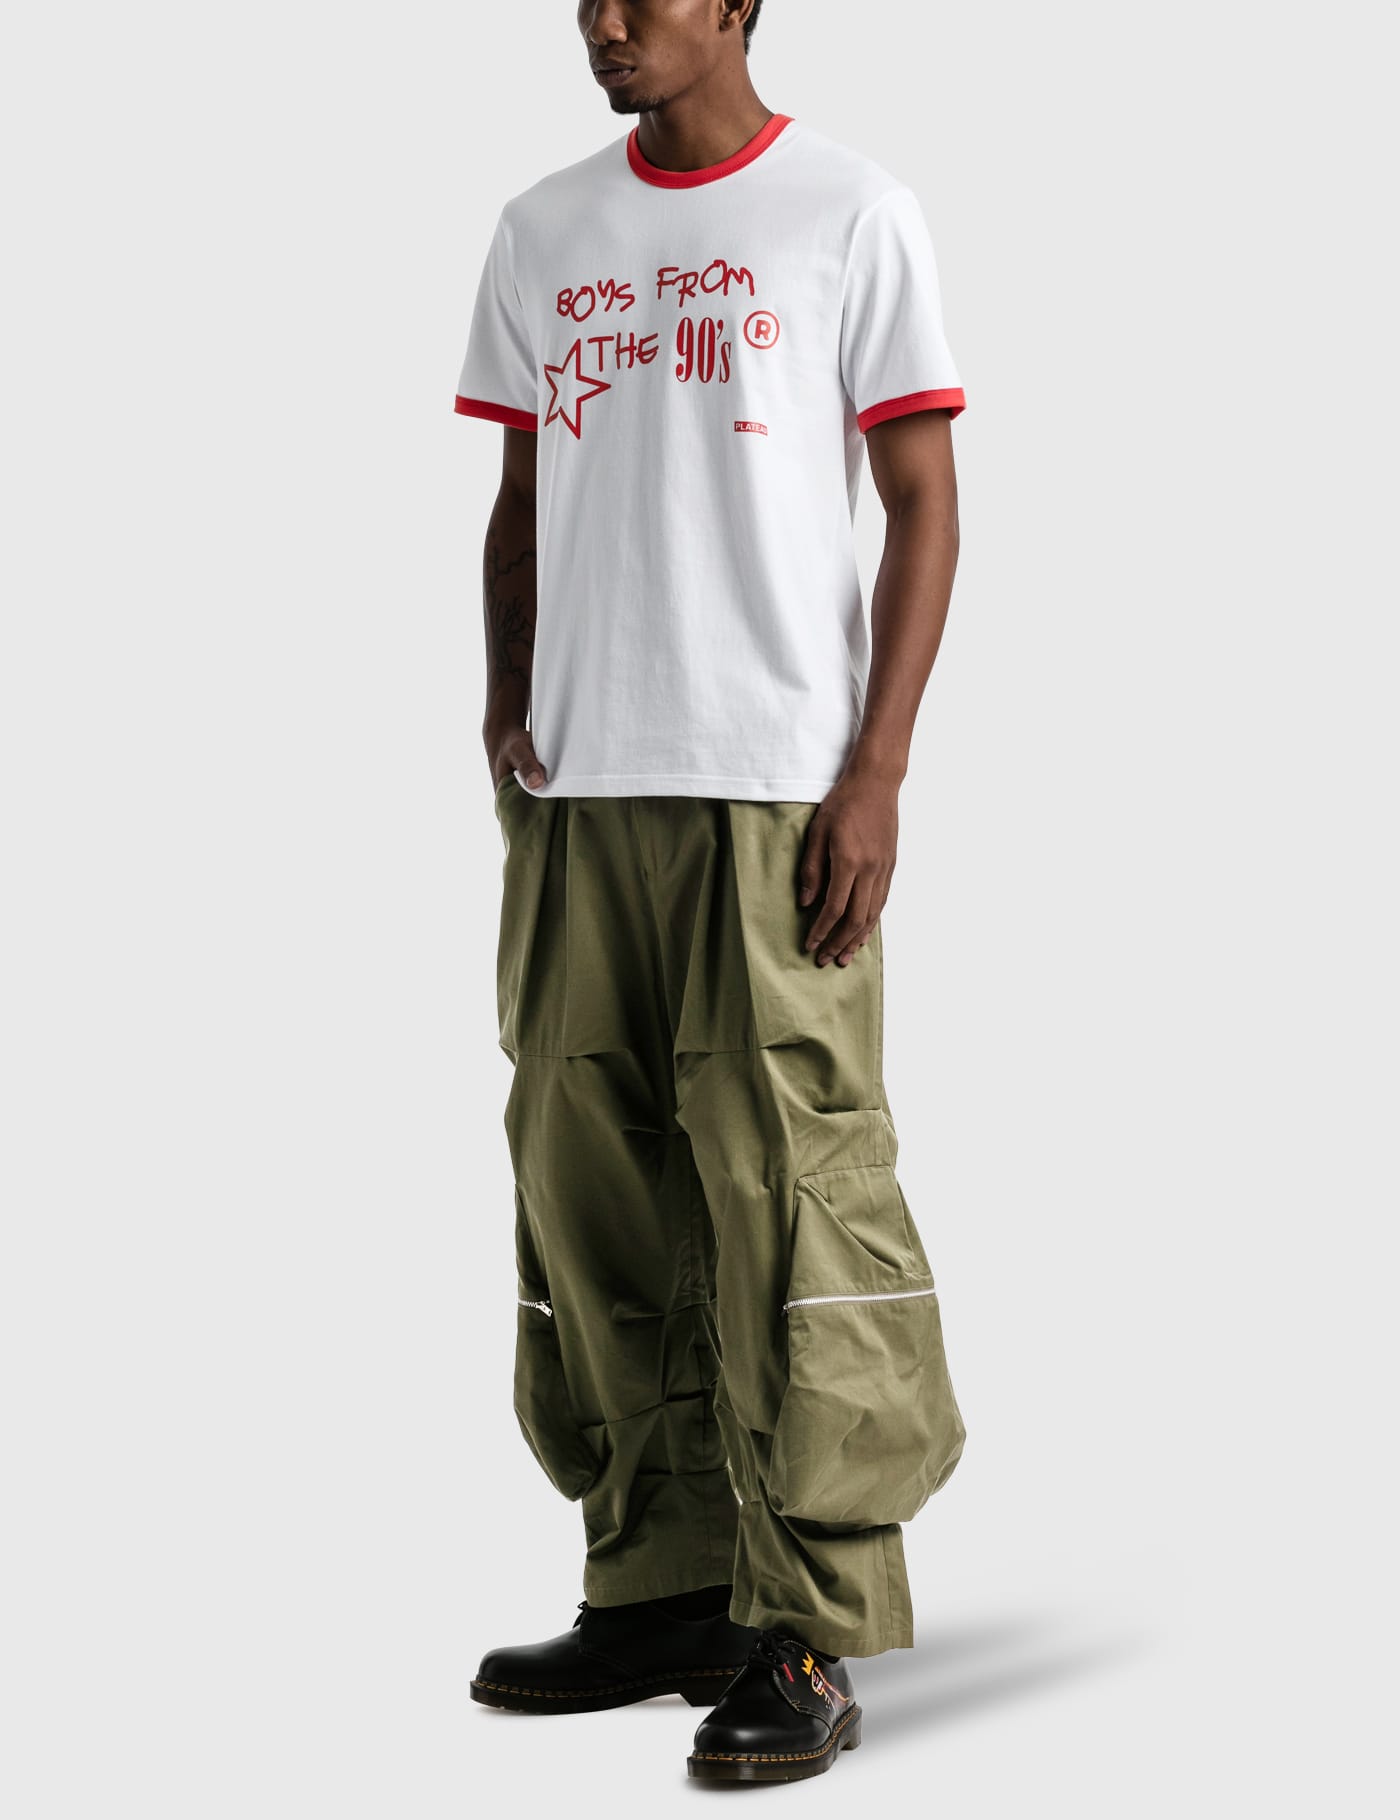 Plateau Studio - 90s Piping T-shirt | HBX - Globally Curated 